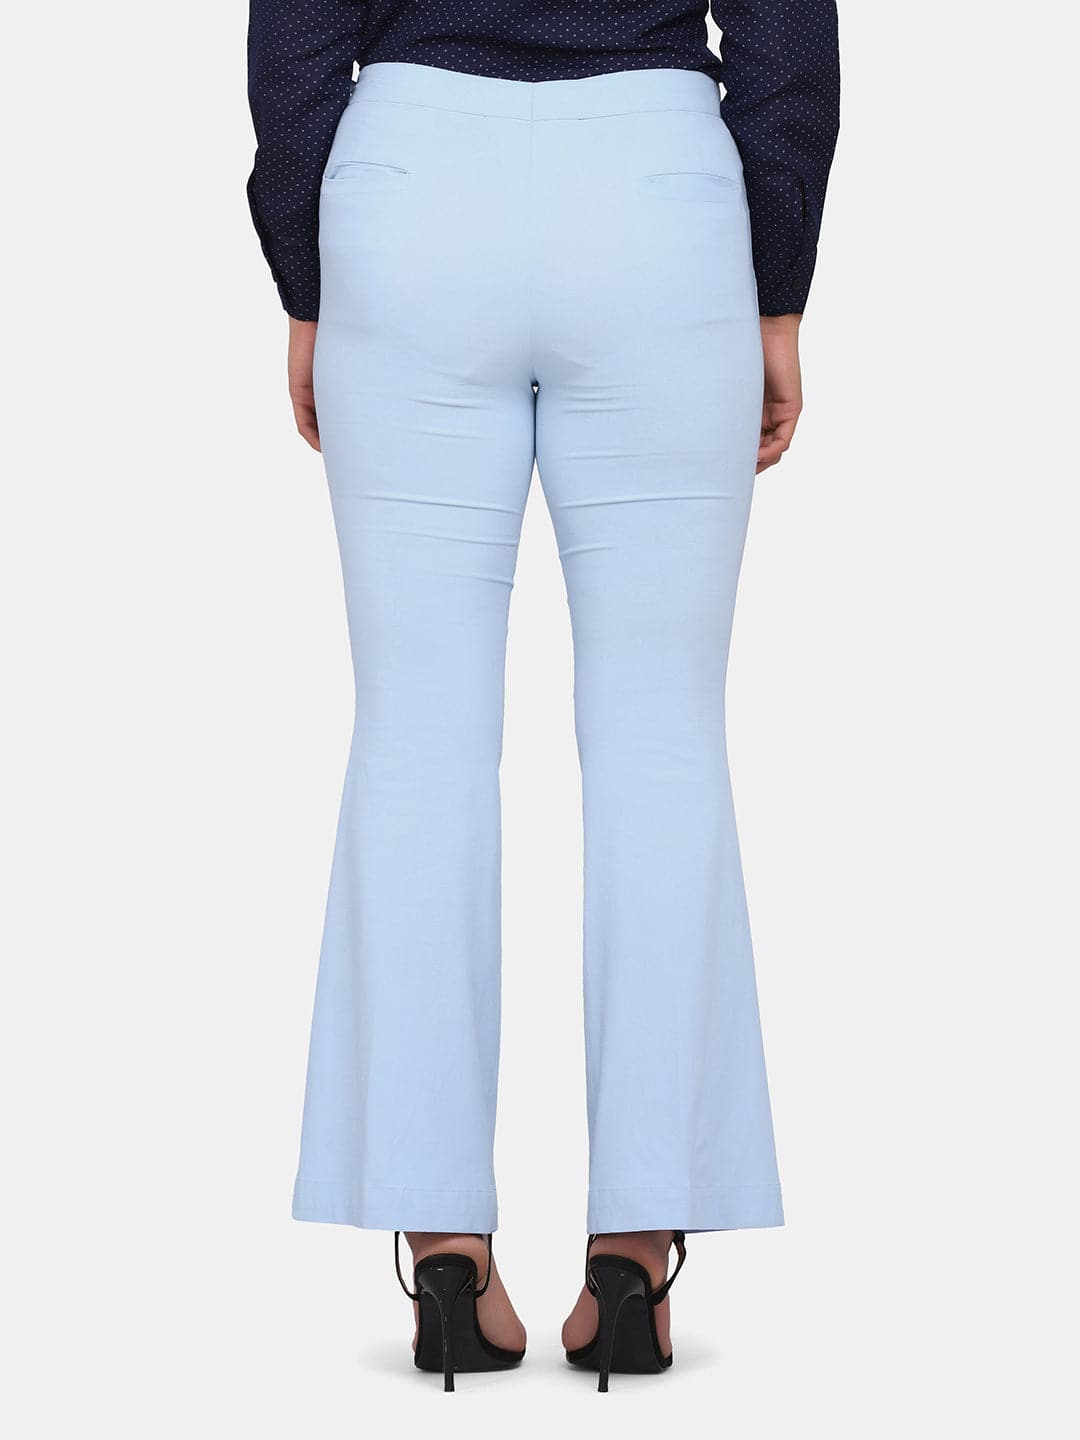 Pull-On Stretch Trousers at Cotton Traders